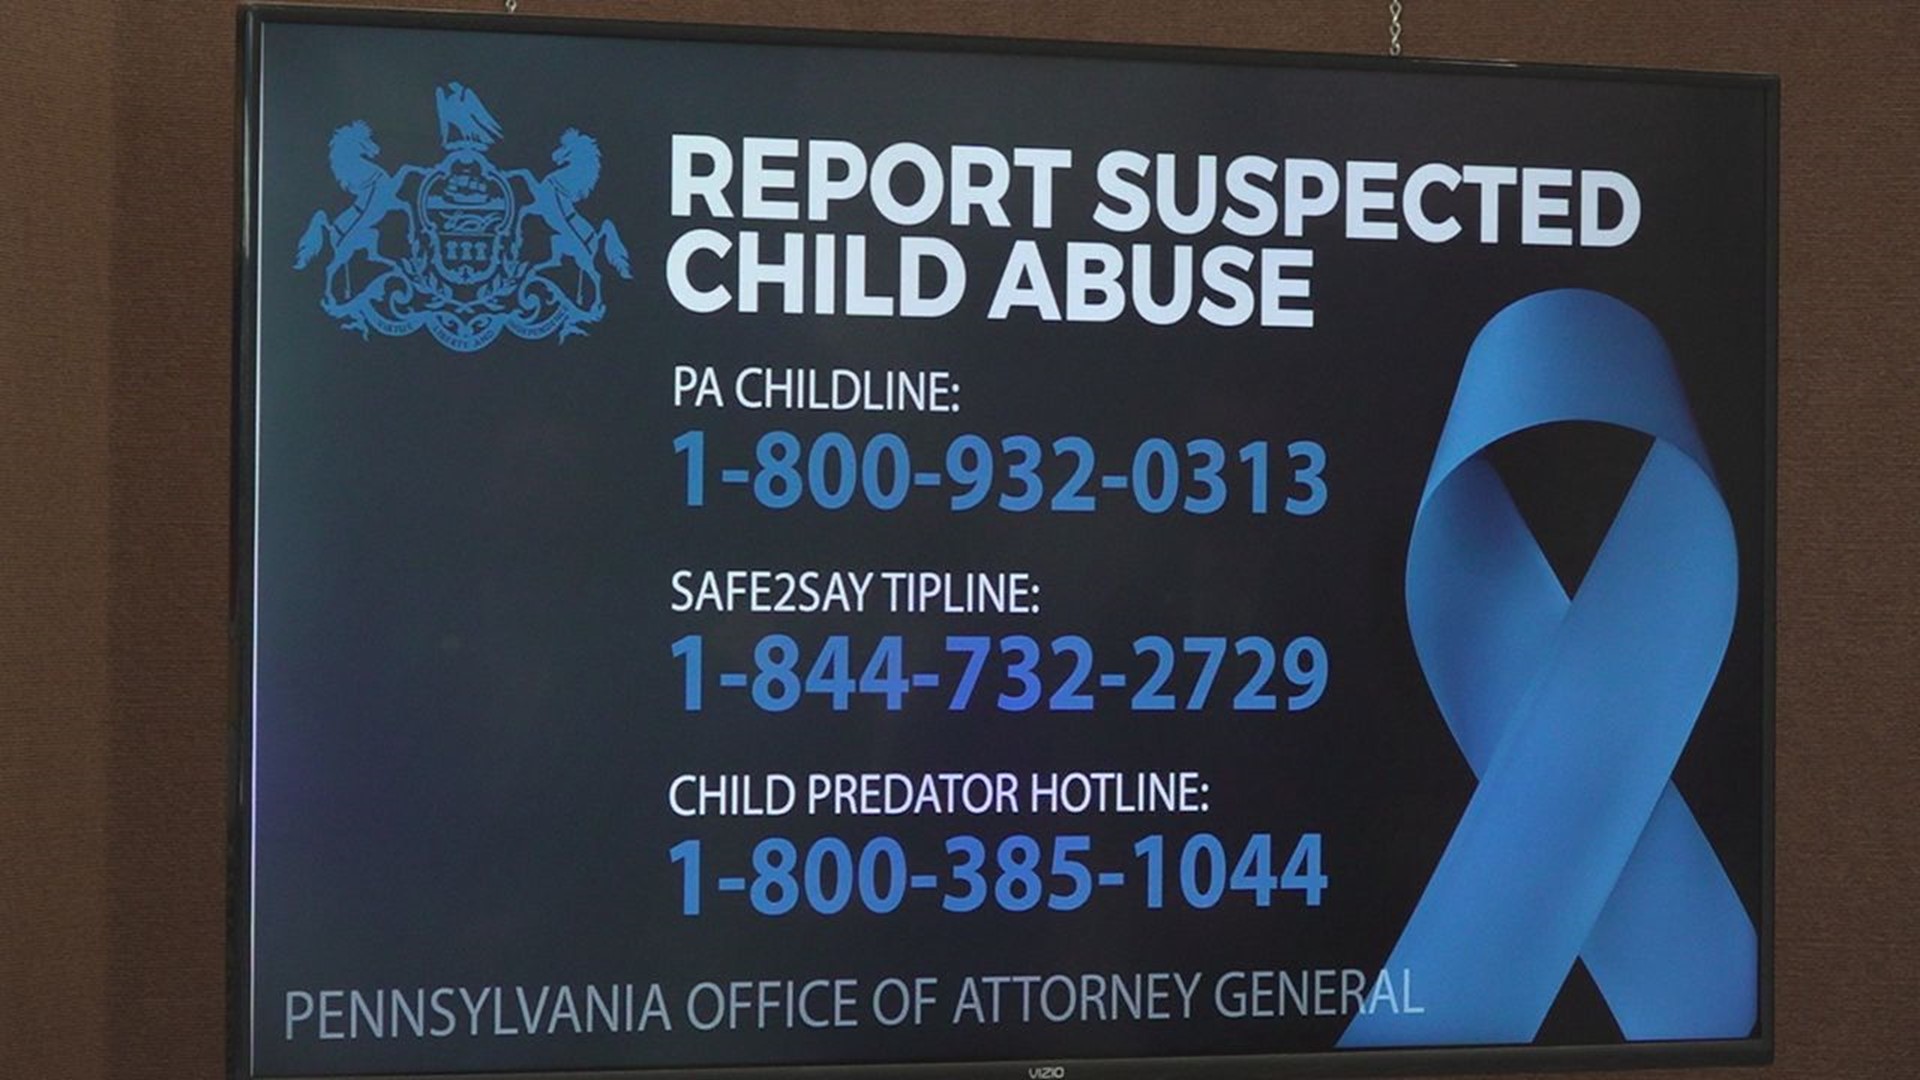 The officials reminded people that if they see something, say something to get child predators off the streets.